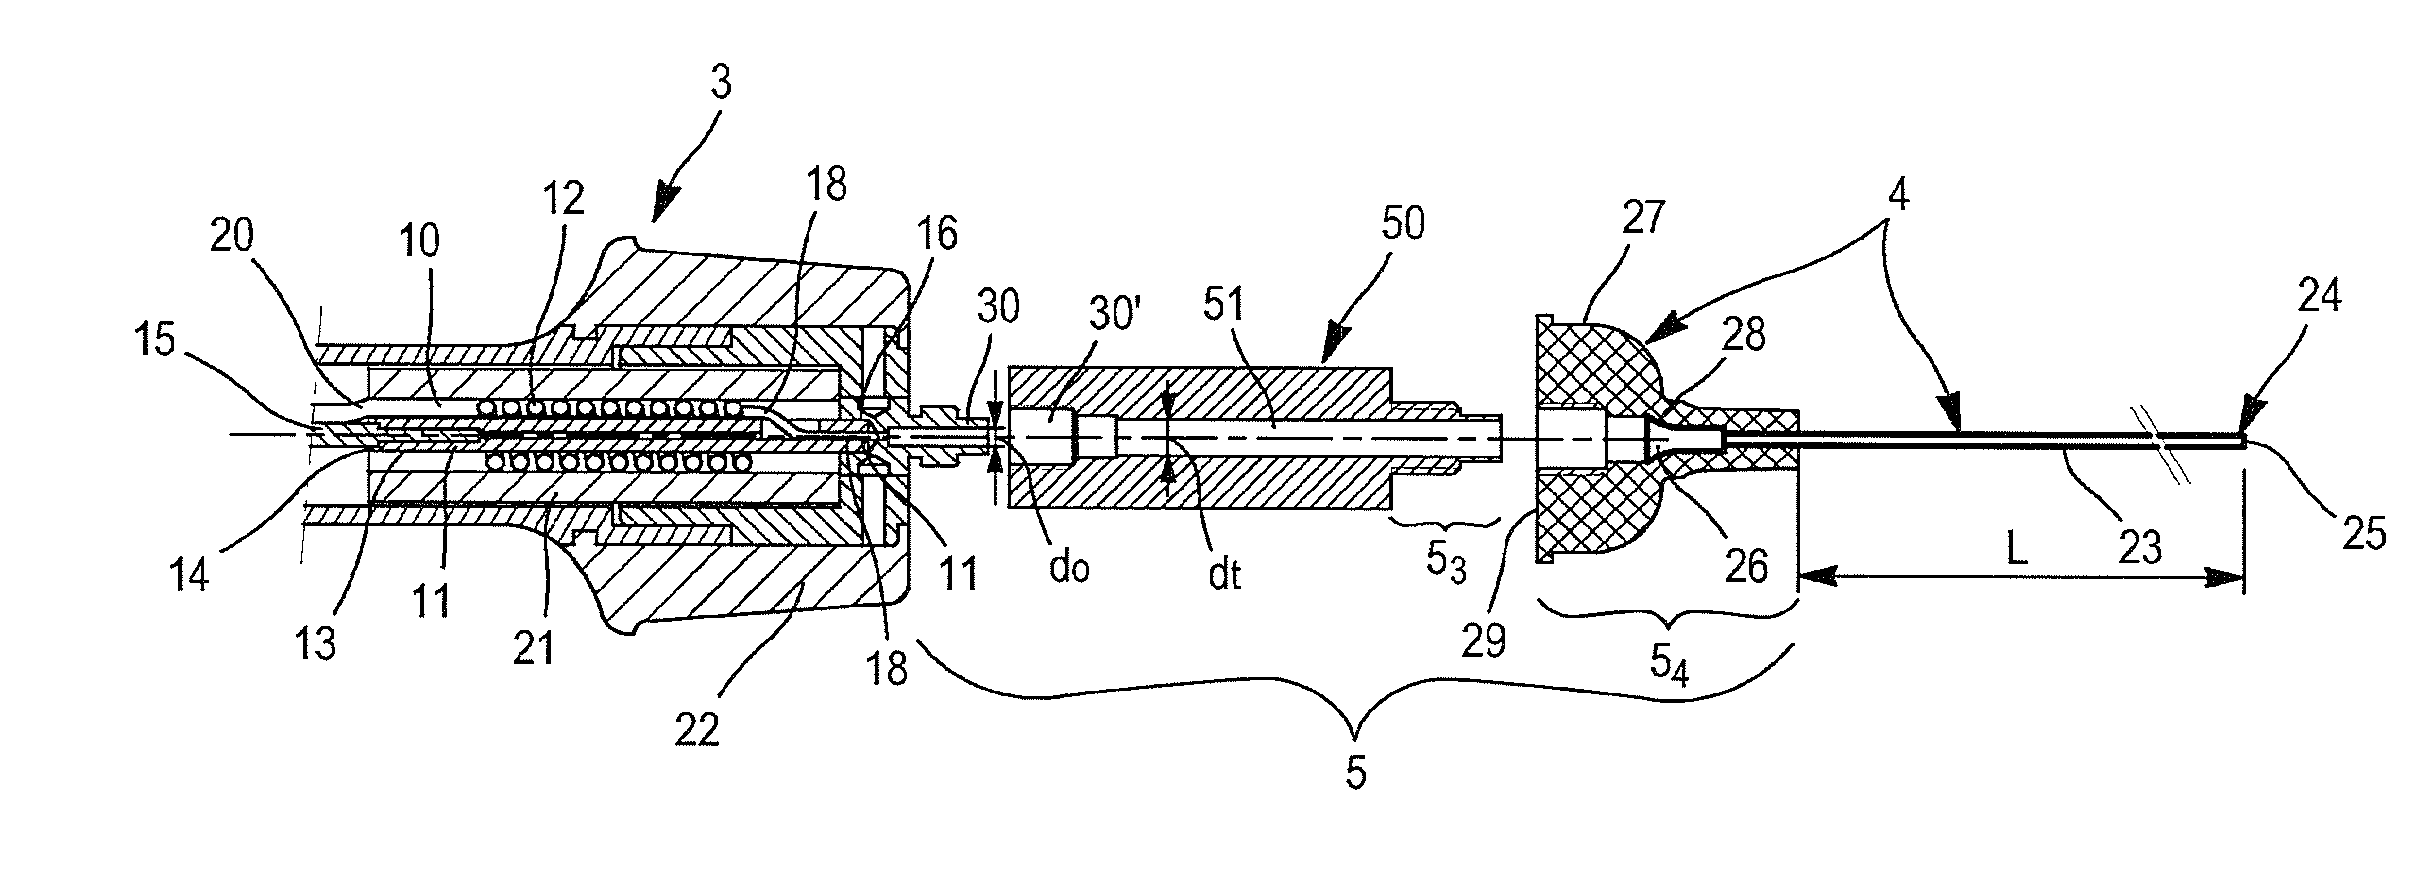 Device and Method for Injecting Pulsed Steam Into a Human or Animal Vessel E.G. a Vein